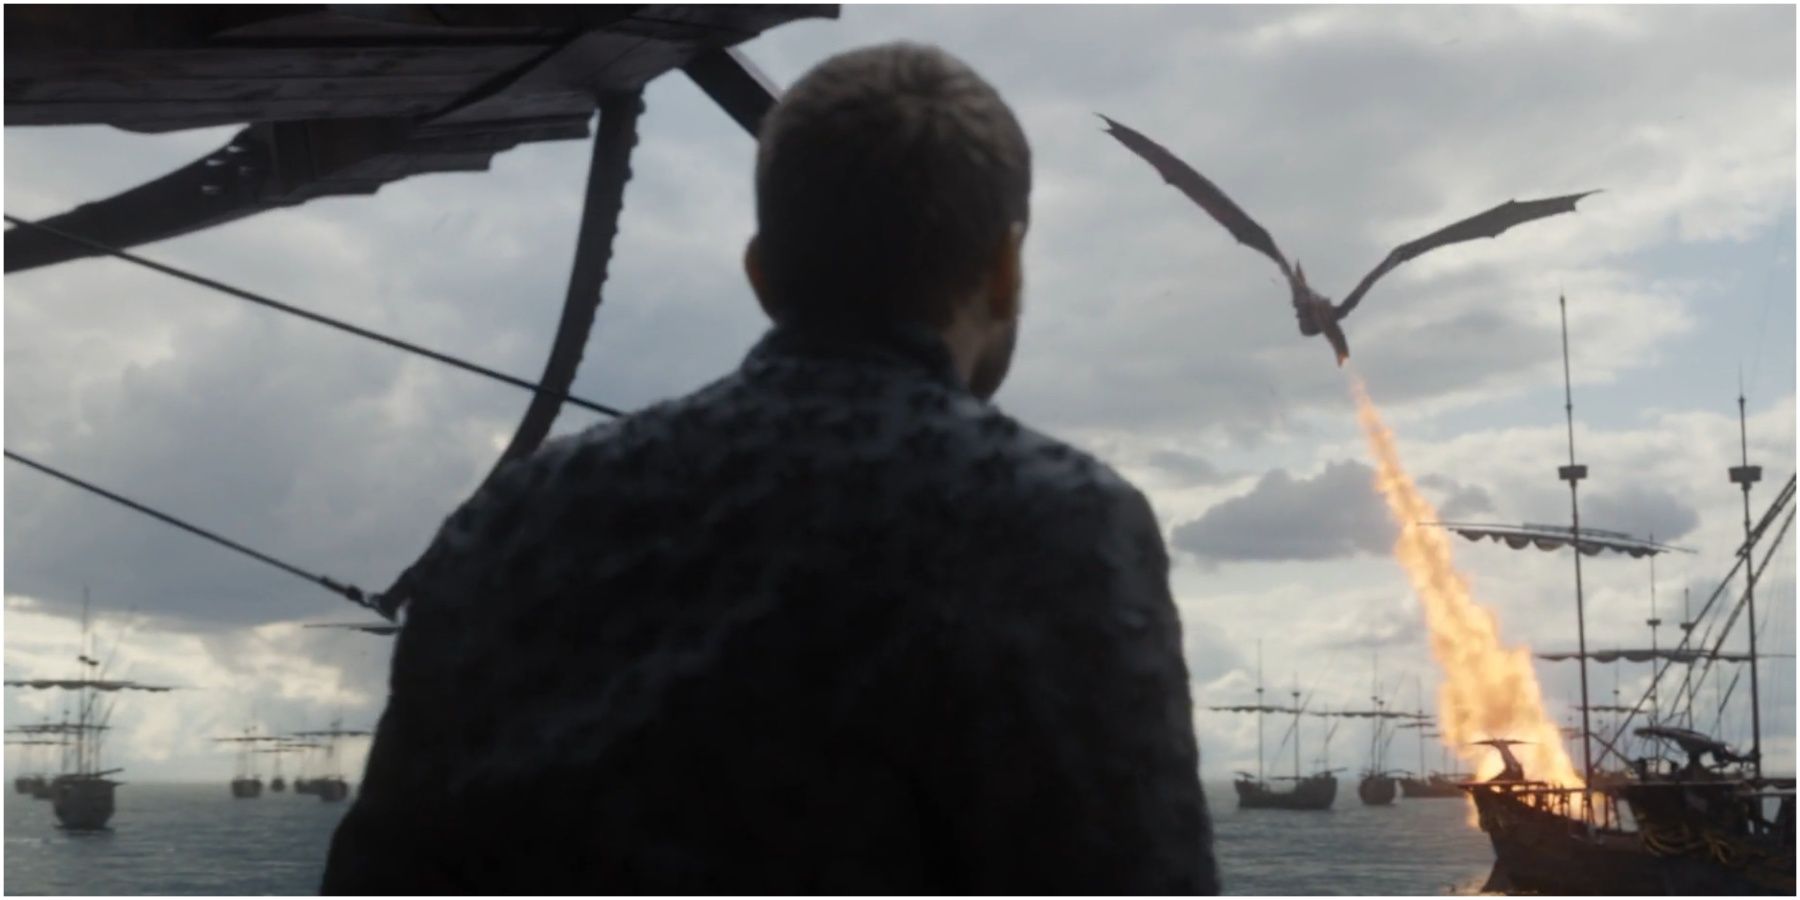 Game of Thrones: How Did House Greyjoy Take The Iron Islands?